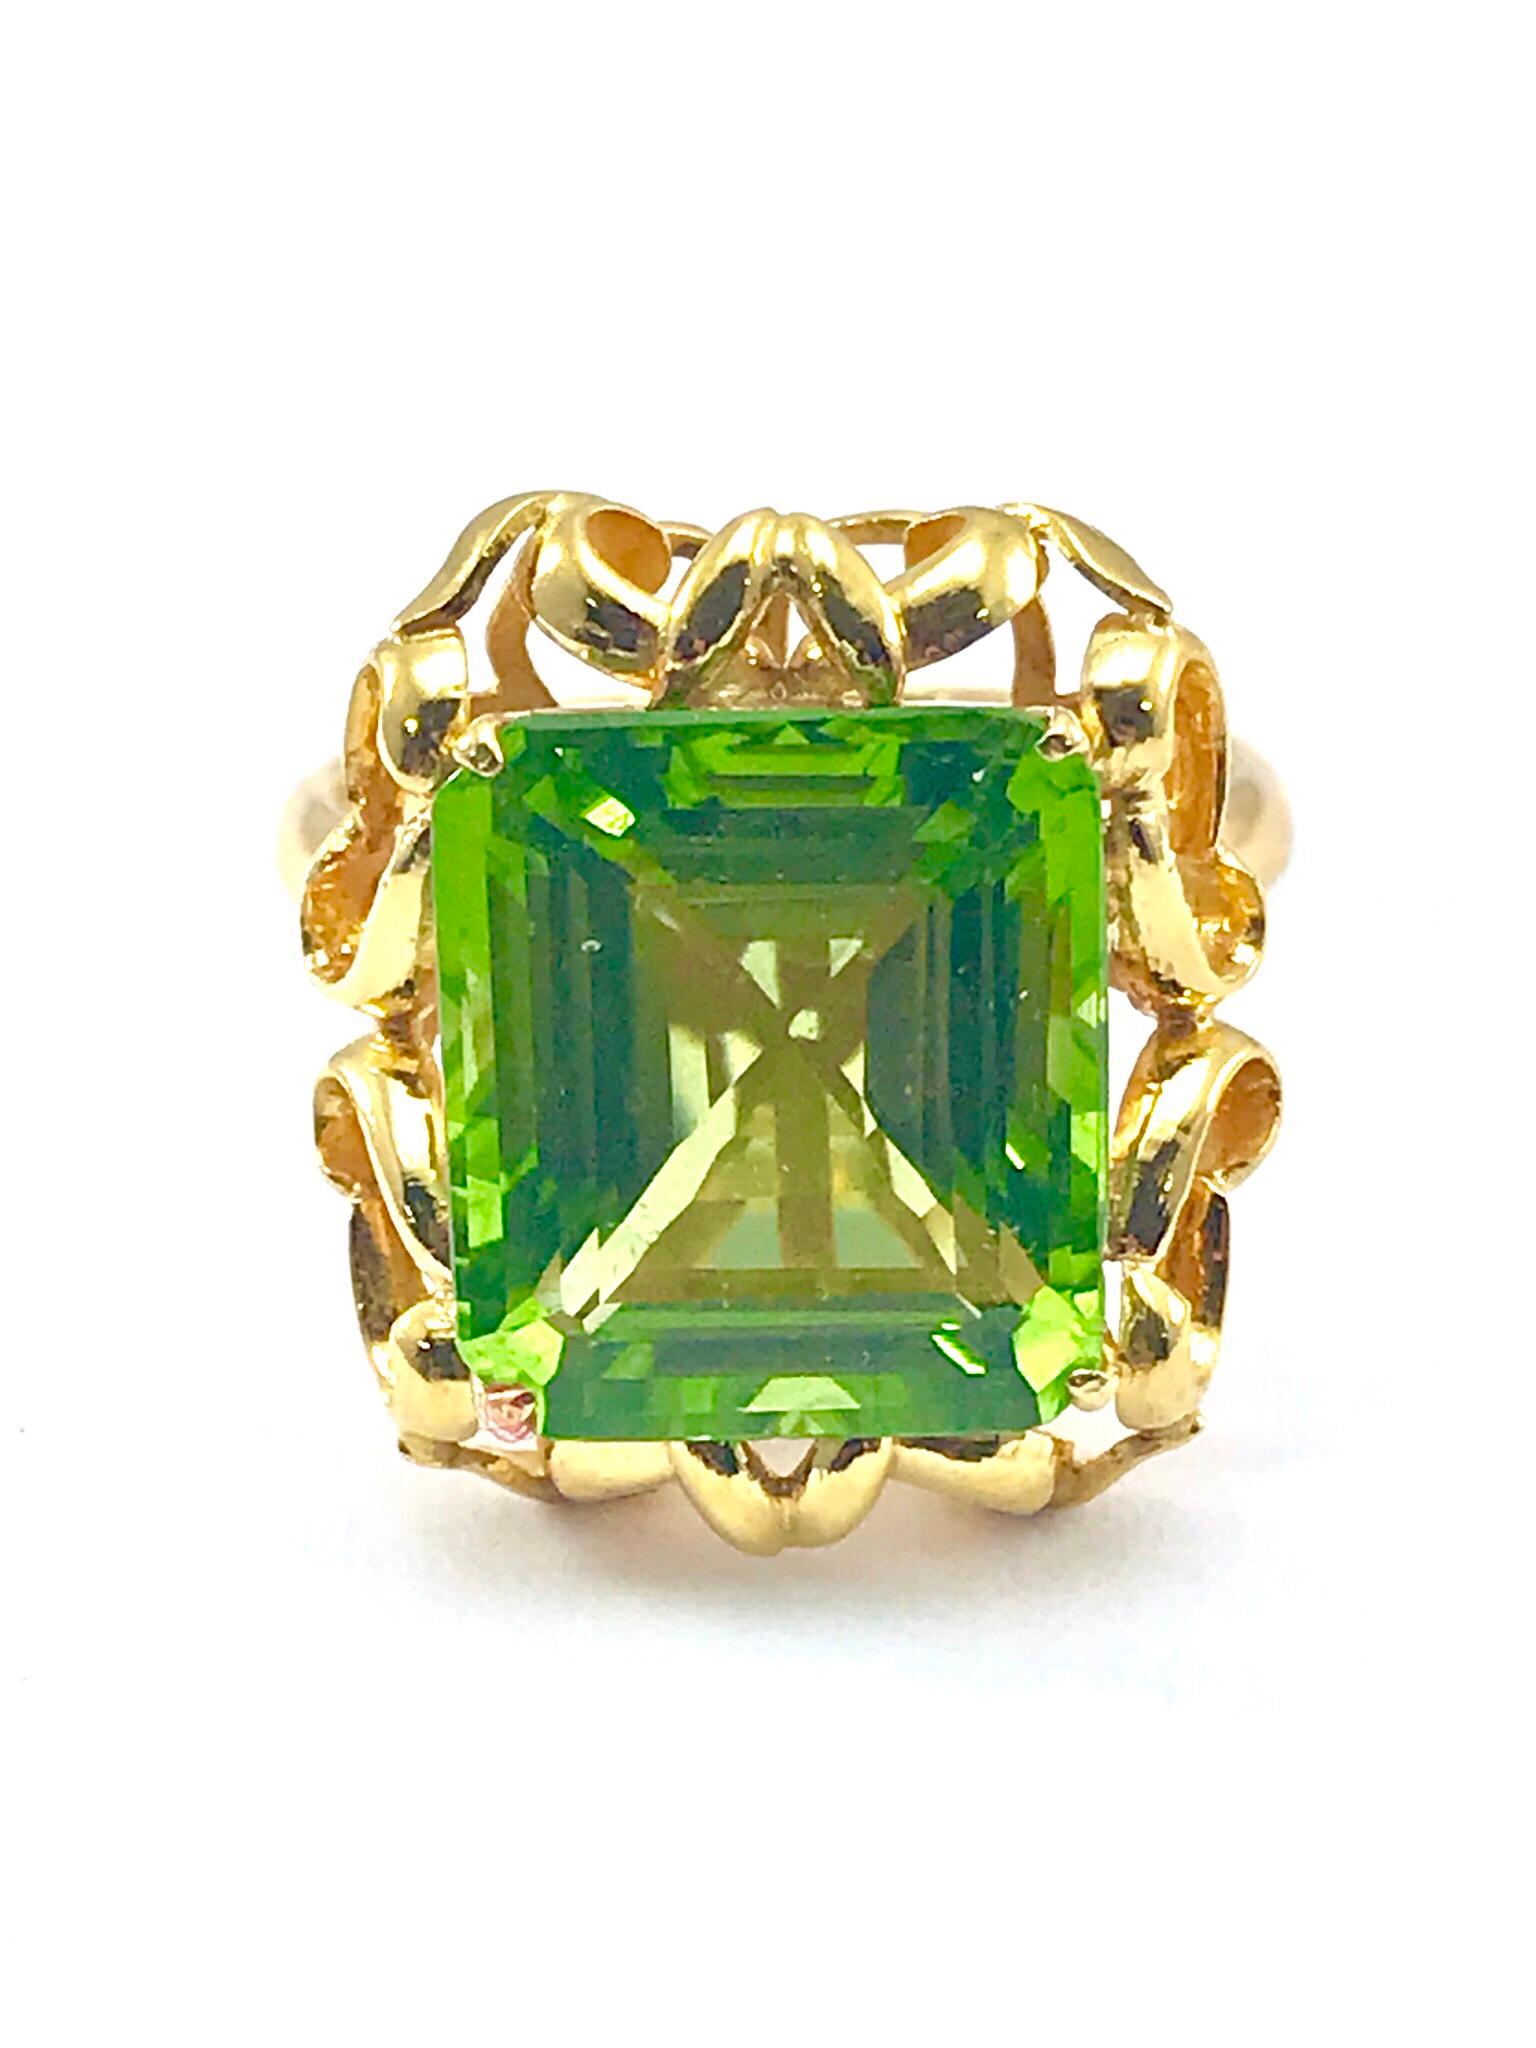 A stunning 7.71 carat step cut lime green Peridot and 18 karat yellow gold cocktail ring.  The Peridot is set with four prongs in an abstract deigned mounting, and a rounded edge shank.  This is a great ring to wear to any occasion, and it is